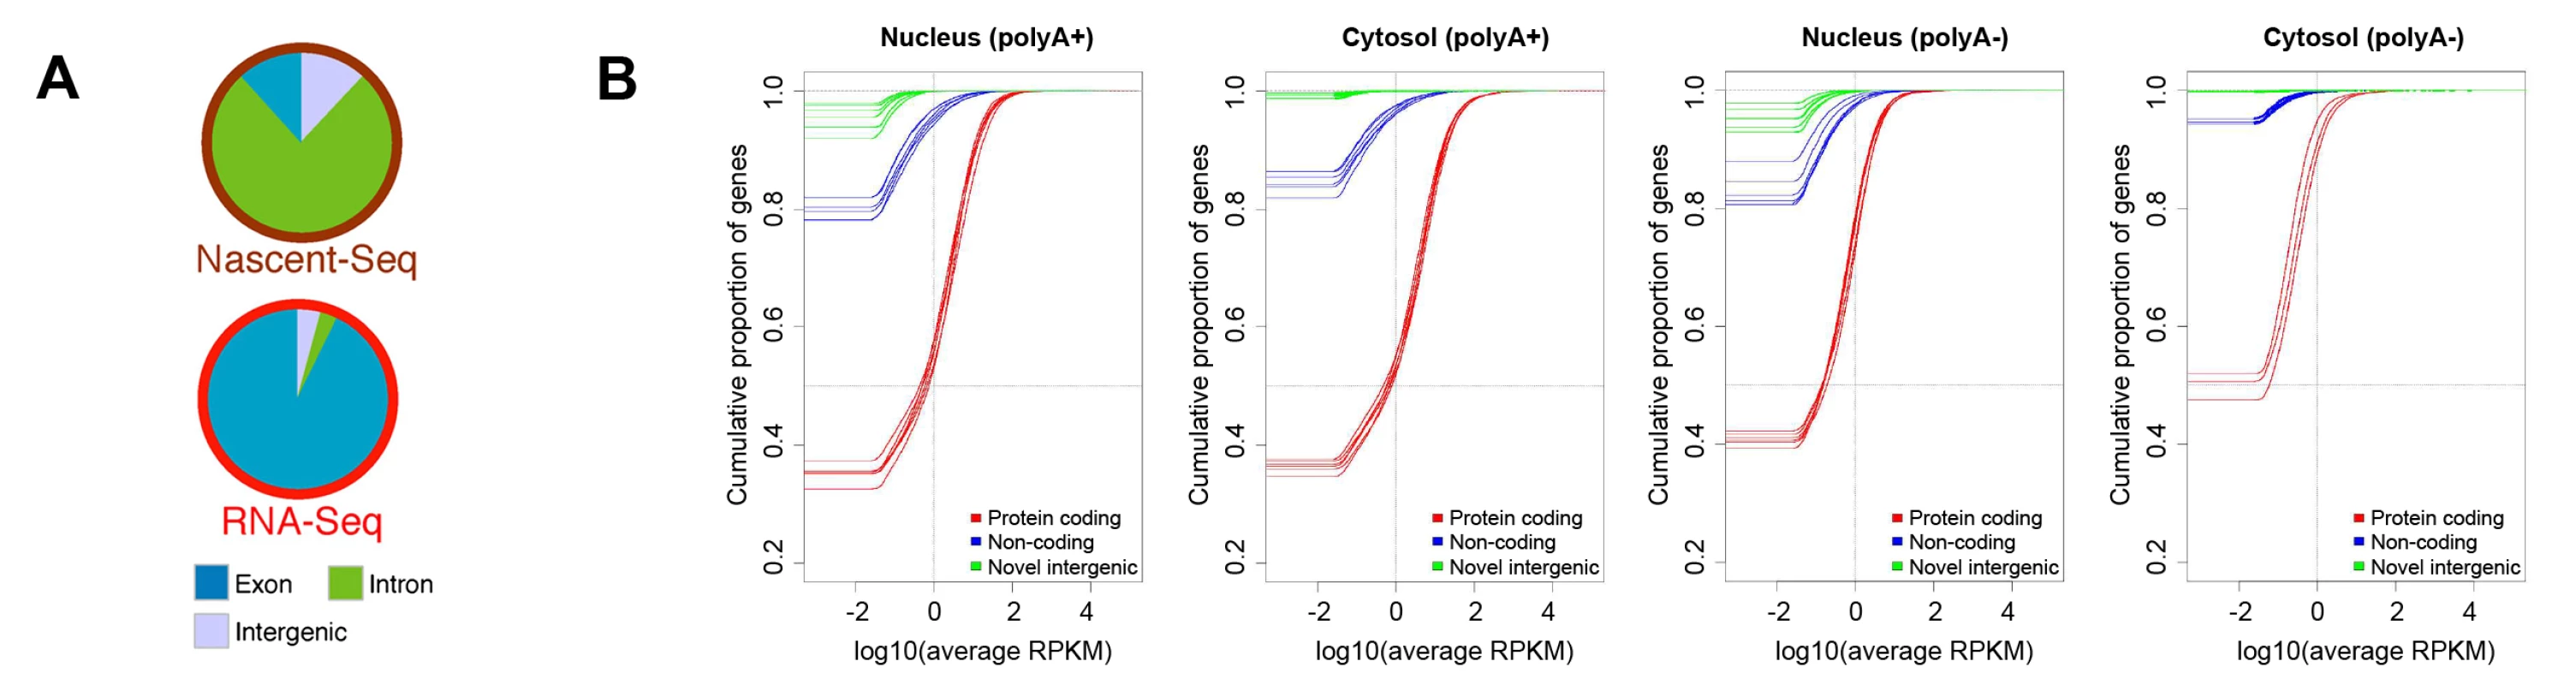 Levels of protein-coding and intergenic RNAs in mammalian cells.